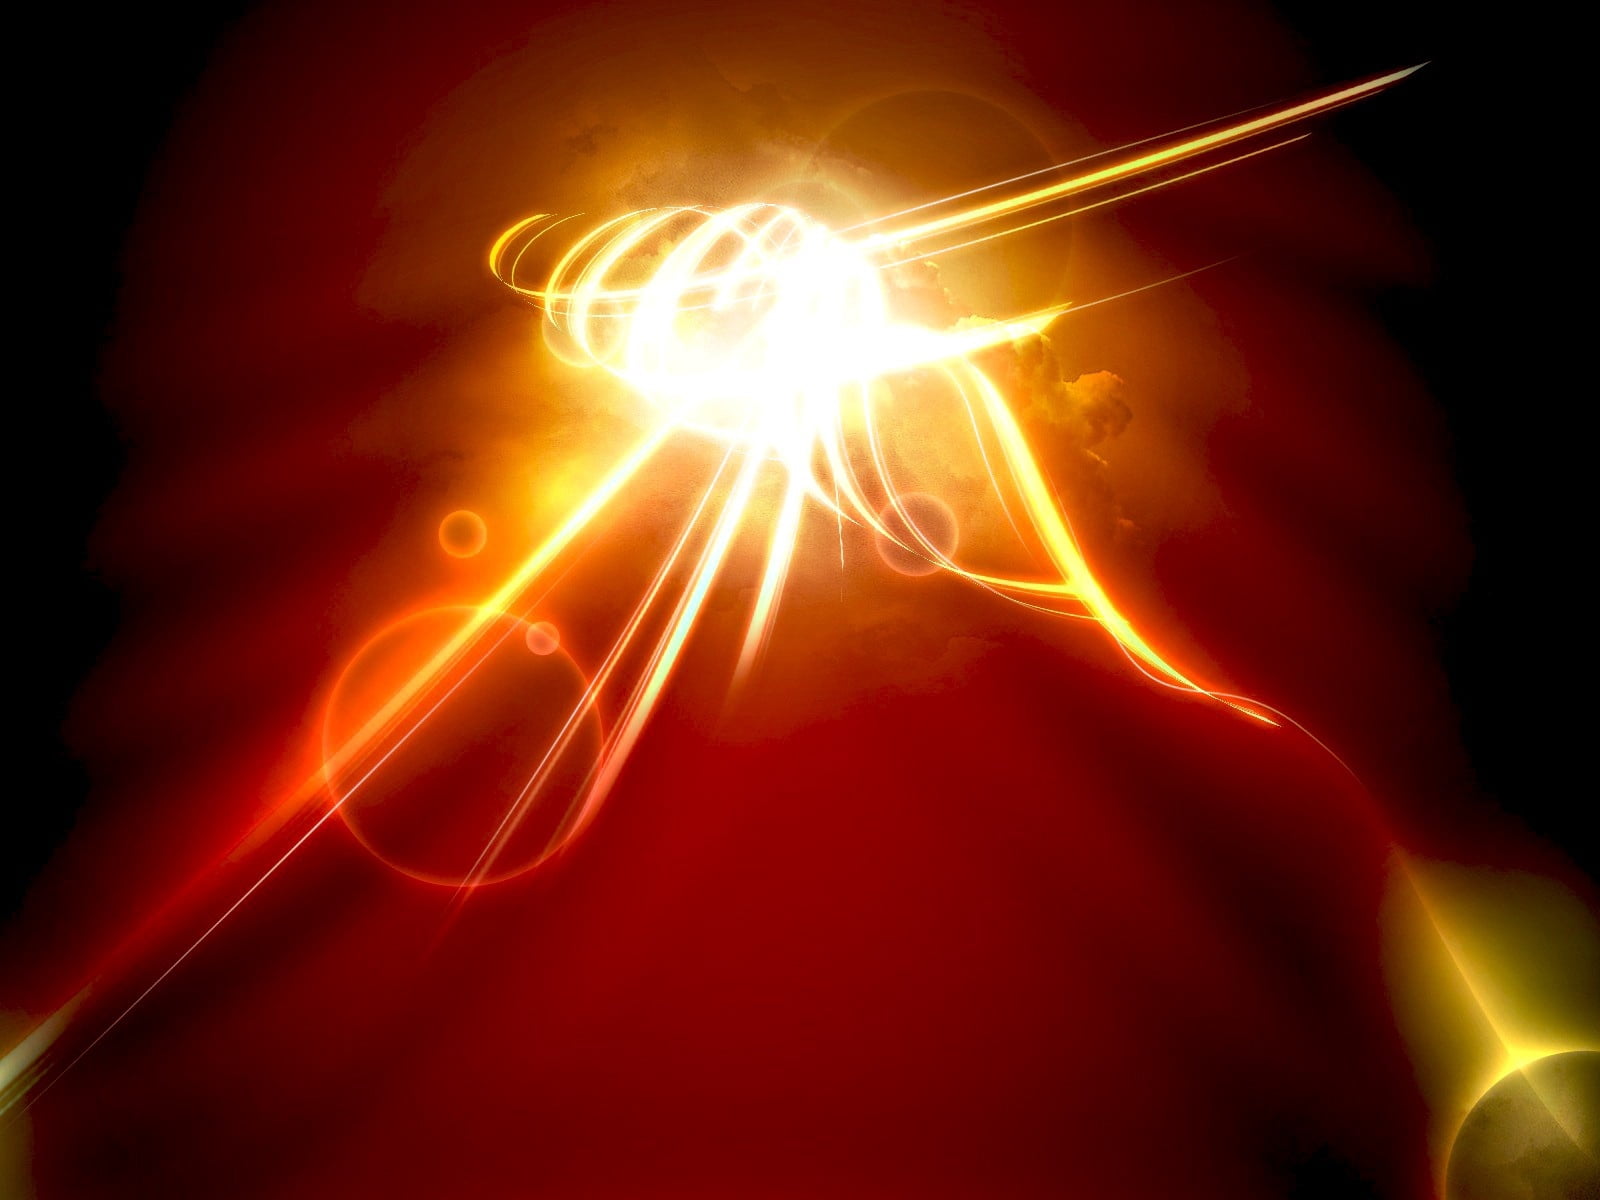 sunburst illustration, fire, lines, curves, shape, abstract, glowing